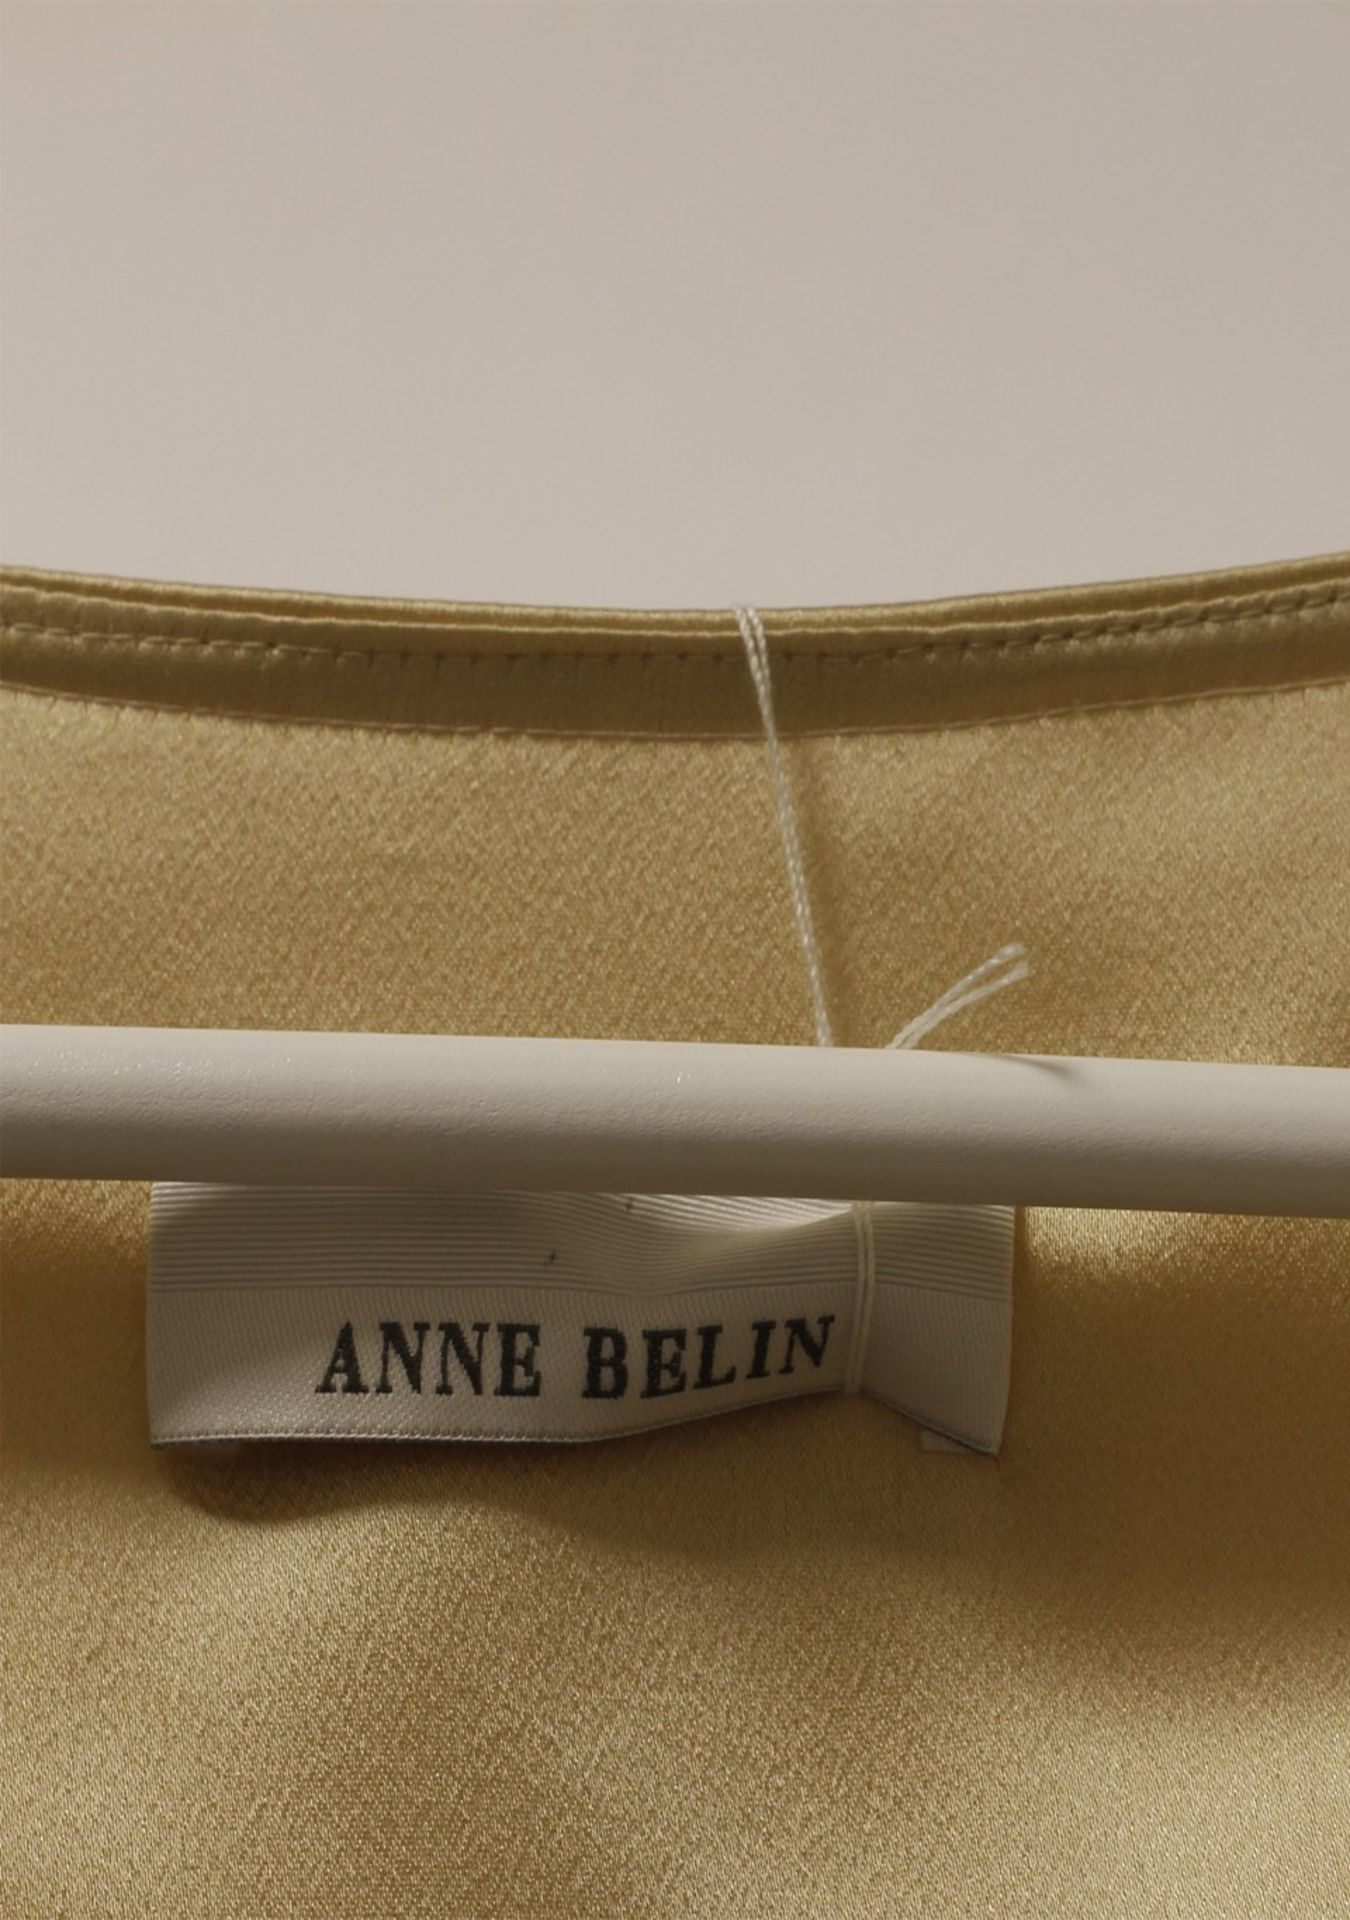 1 x Anne Belin Champagne Bolero - Size: 16 - Material: 50% Viscose, 50% Acetate - From a High End - Image 5 of 6